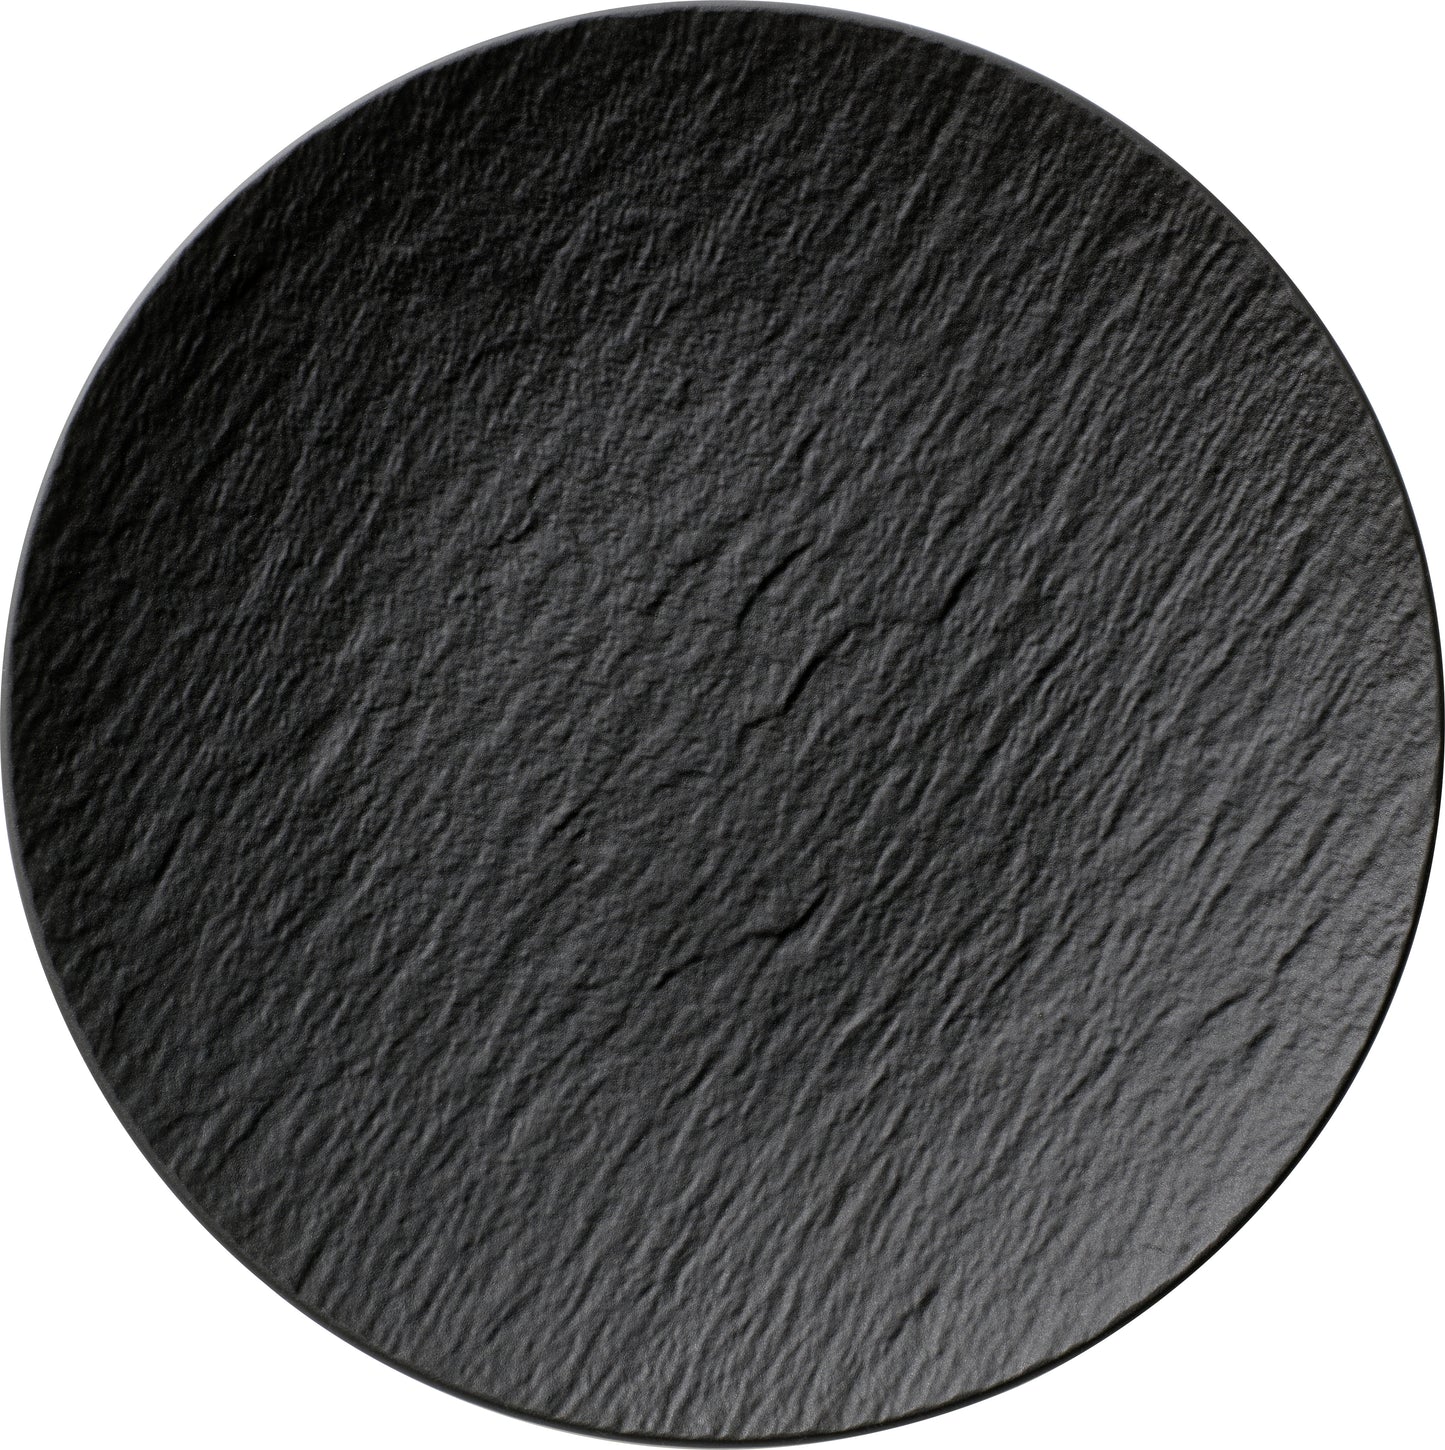 The Rock Black Shale Flat Coupe Plate, 12.4"